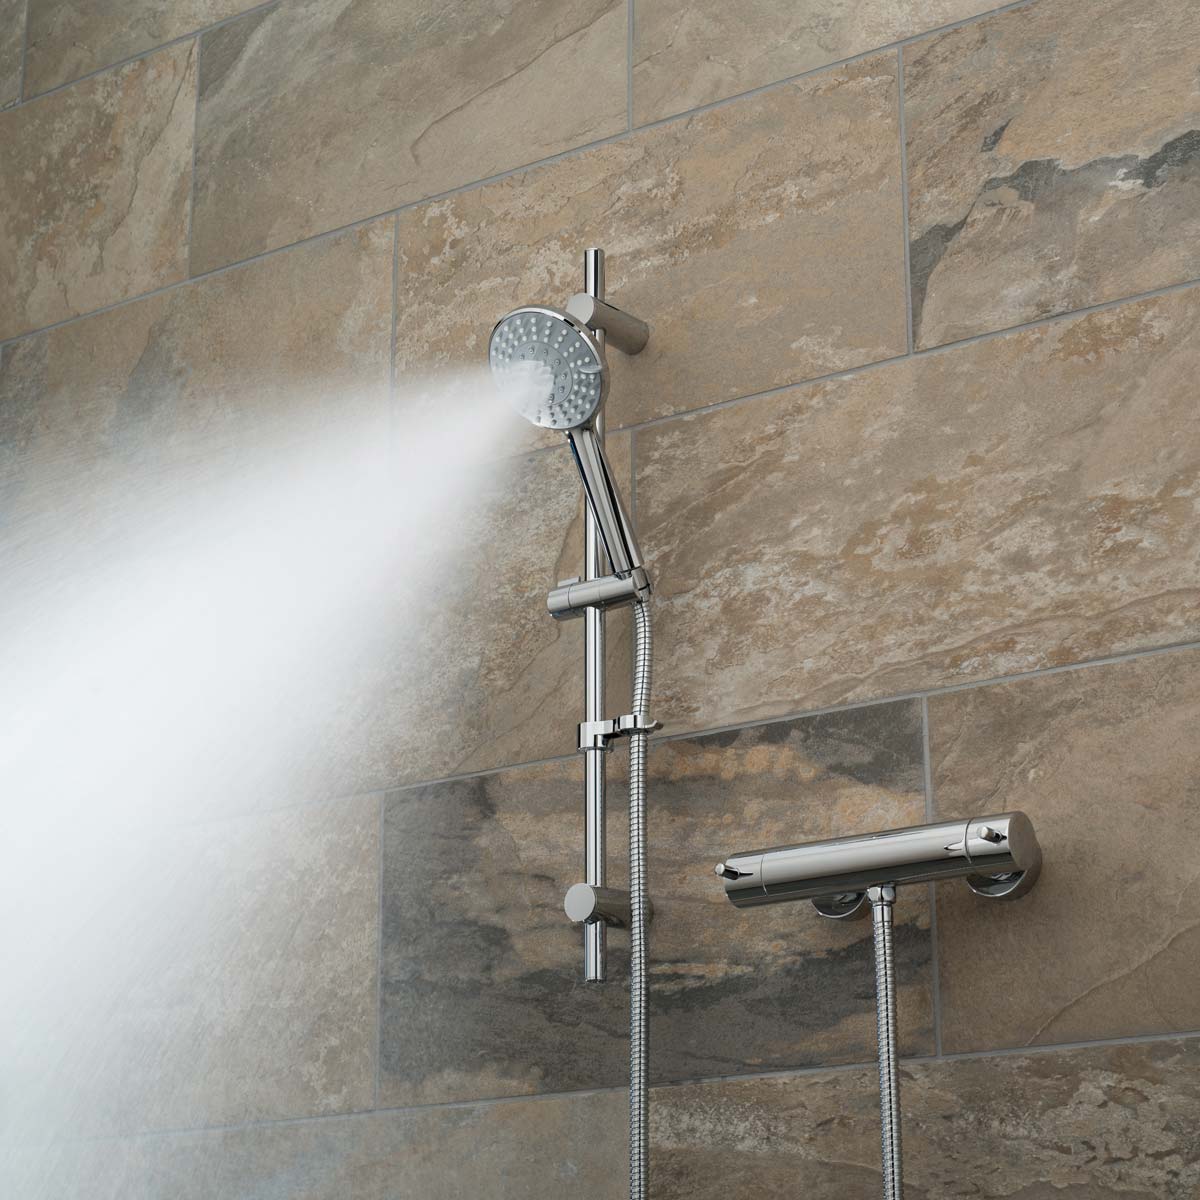 A slide rail shower kit with an exposed thermostatic bar type valve on a brown tiled wall with a mist spray pattern